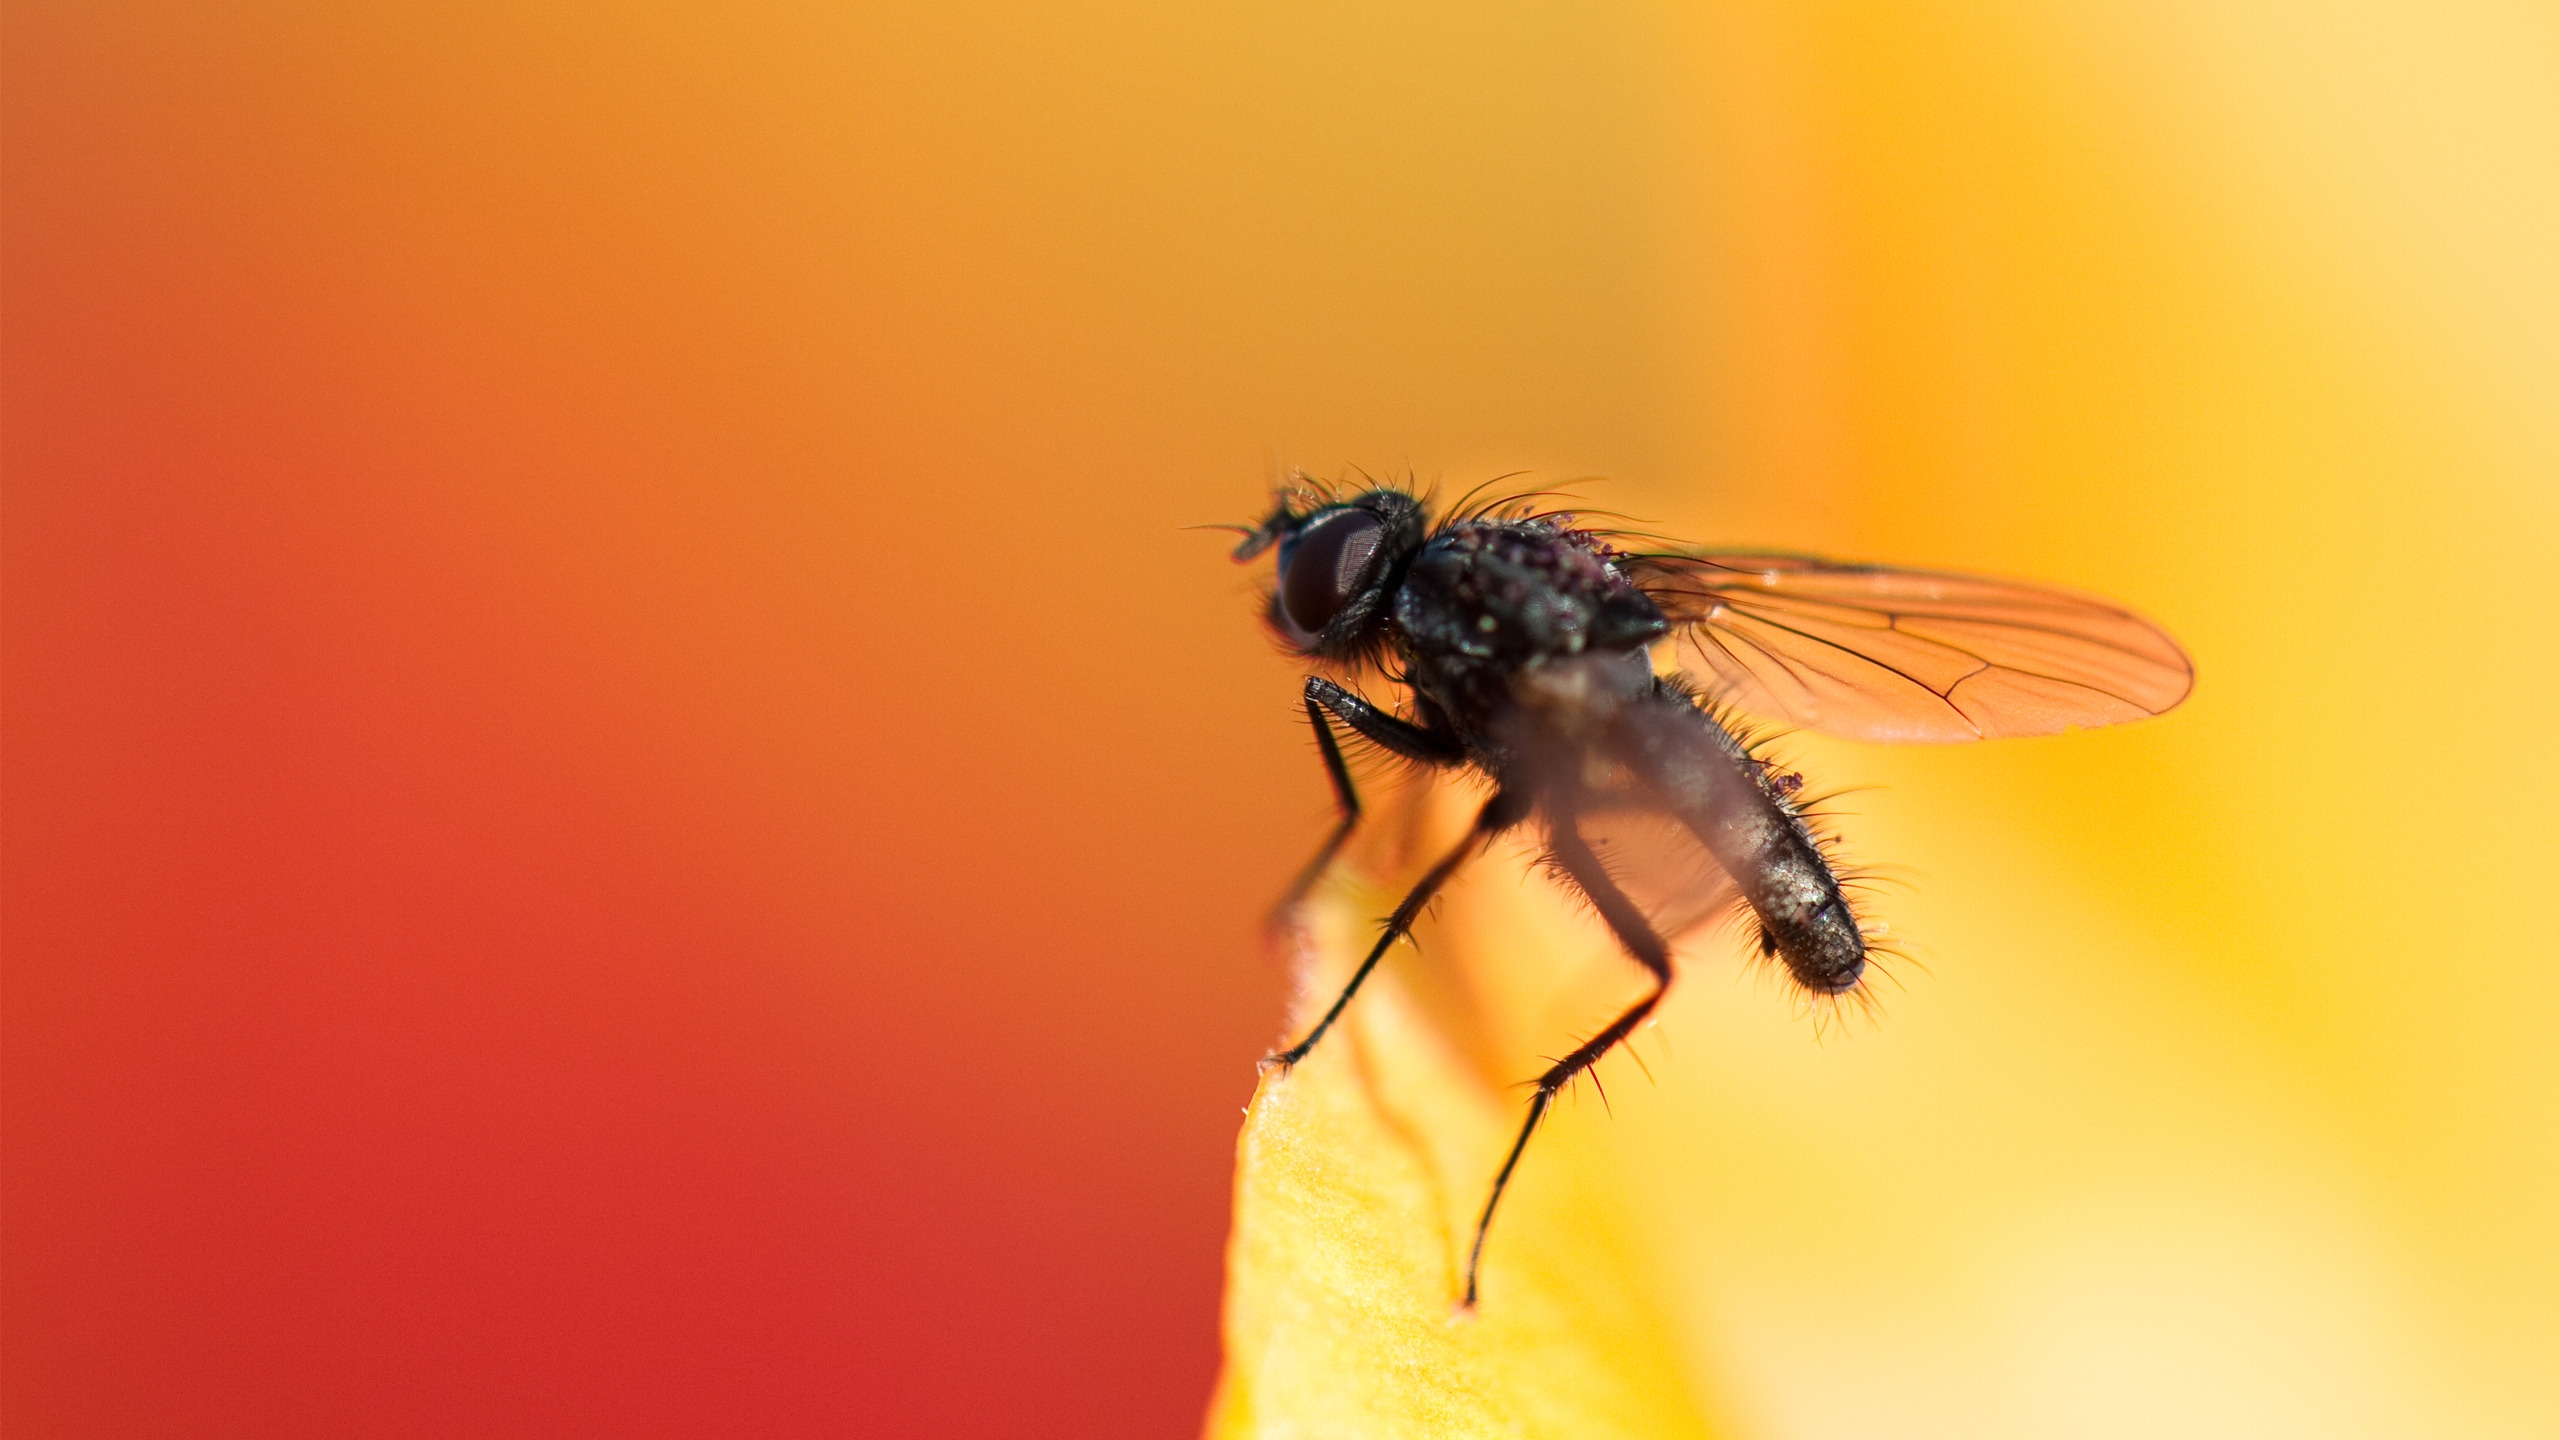 Fly for 2560x1440 HDTV resolution